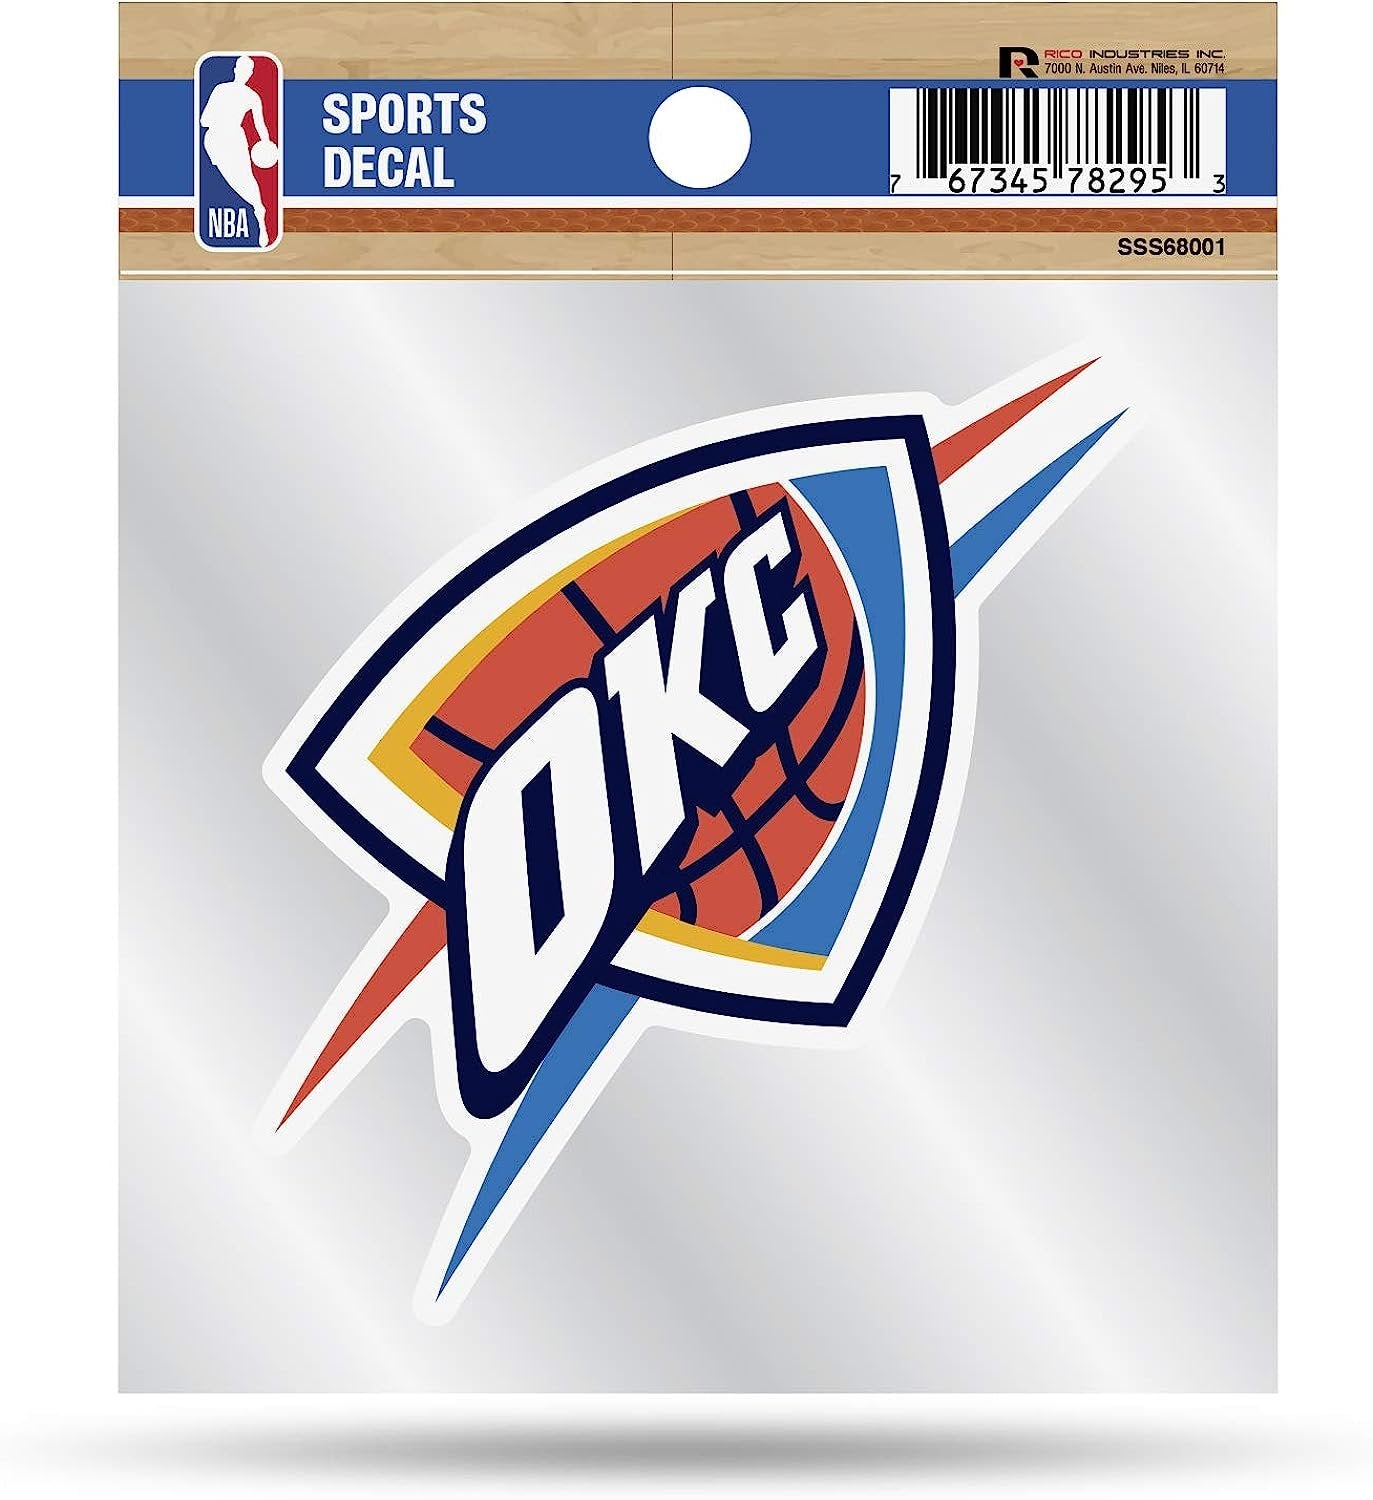 Oklahoma City Thunder 4x4 Die Cut Inch Decal Sticker Flat Vinyl, Primary Logo, Clear Backing